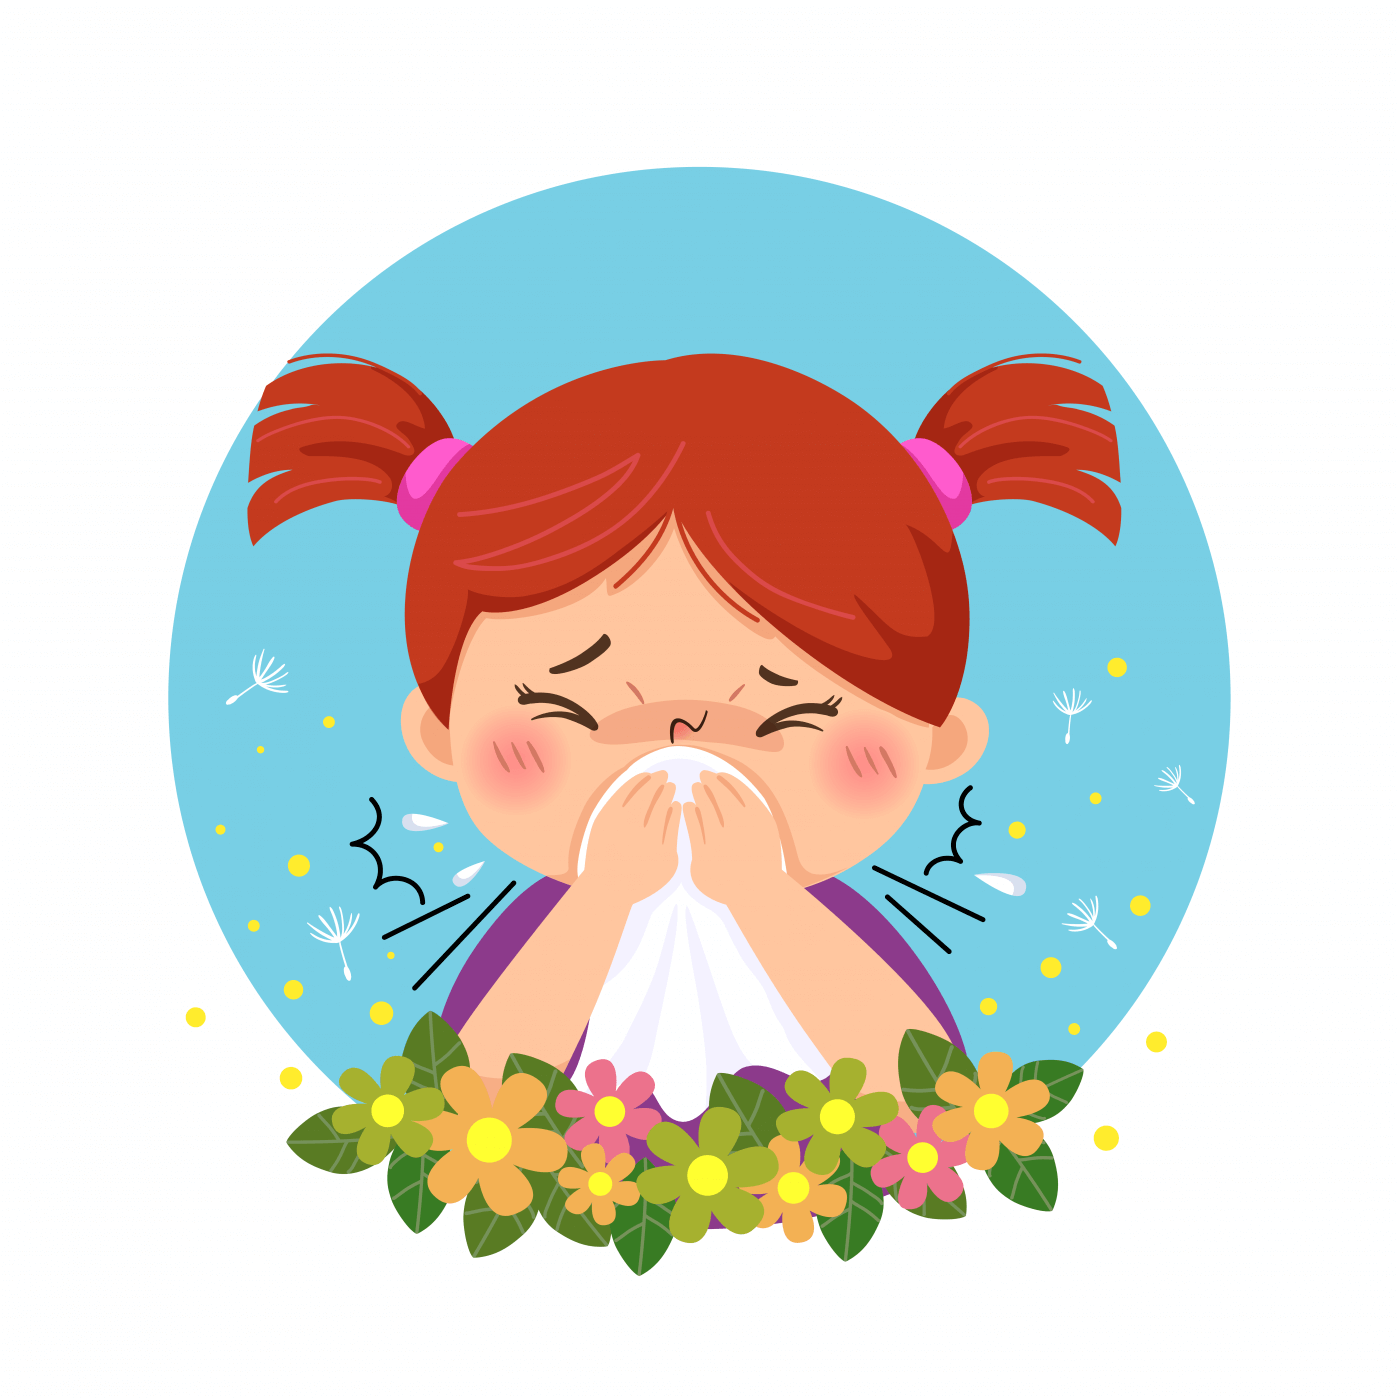 Seasonal Allergies: It's the Time of the Sneez-on!